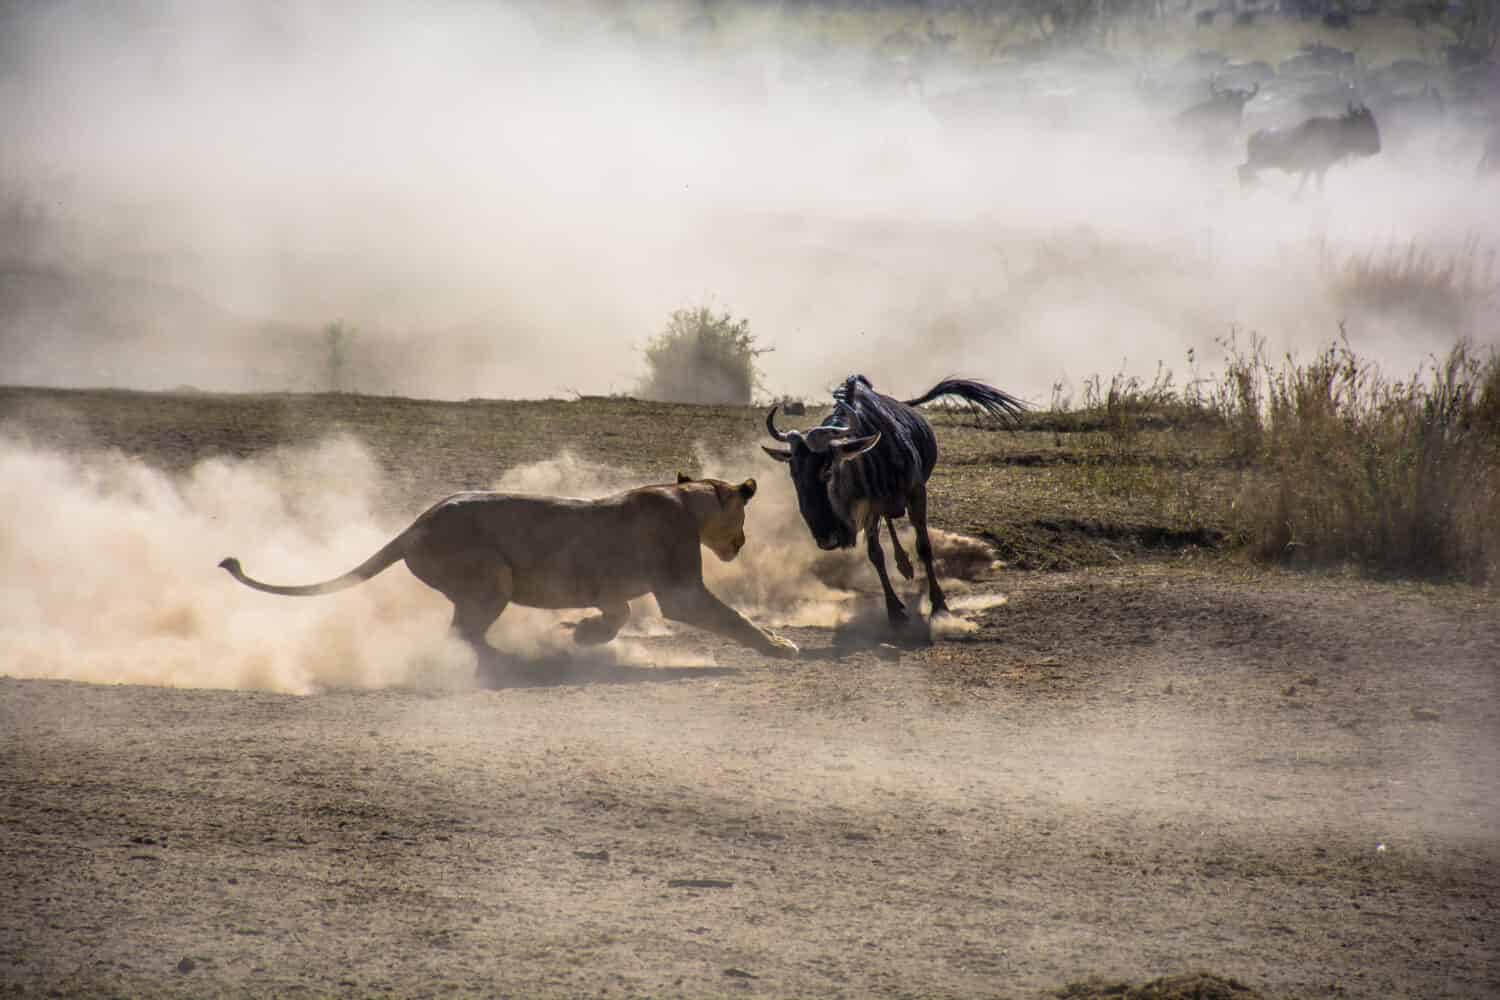 A female Lion ambushes a Wildebeest at a water hole in Tanzania, the Serengeti